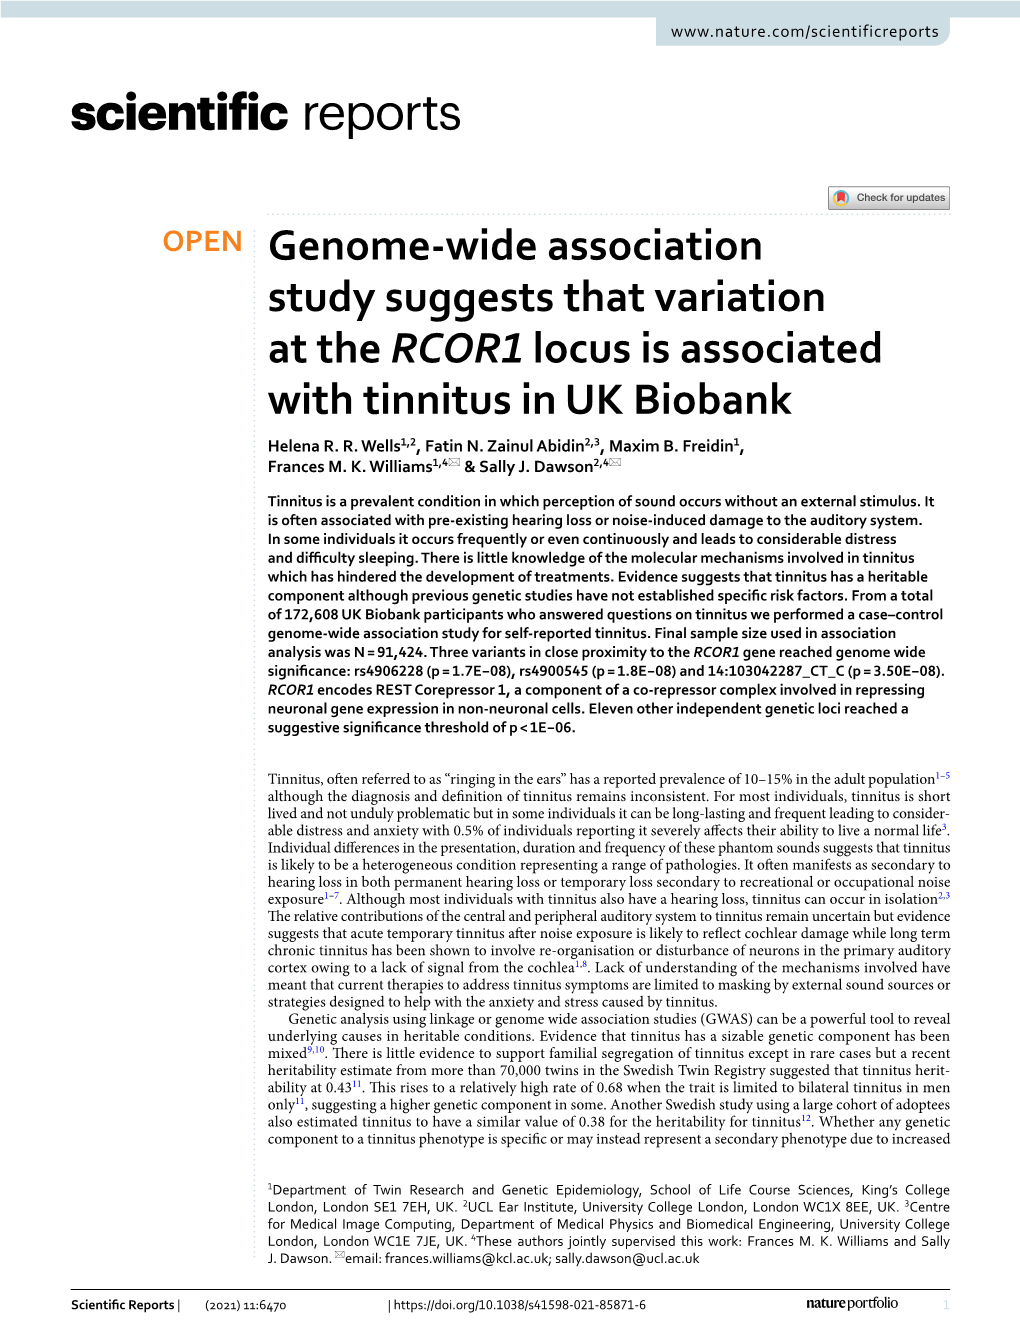 Genome-Wide Association Study Suggests That Variation at the RCOR1 Locus Is Associated with Tinnitus in UK Biobank